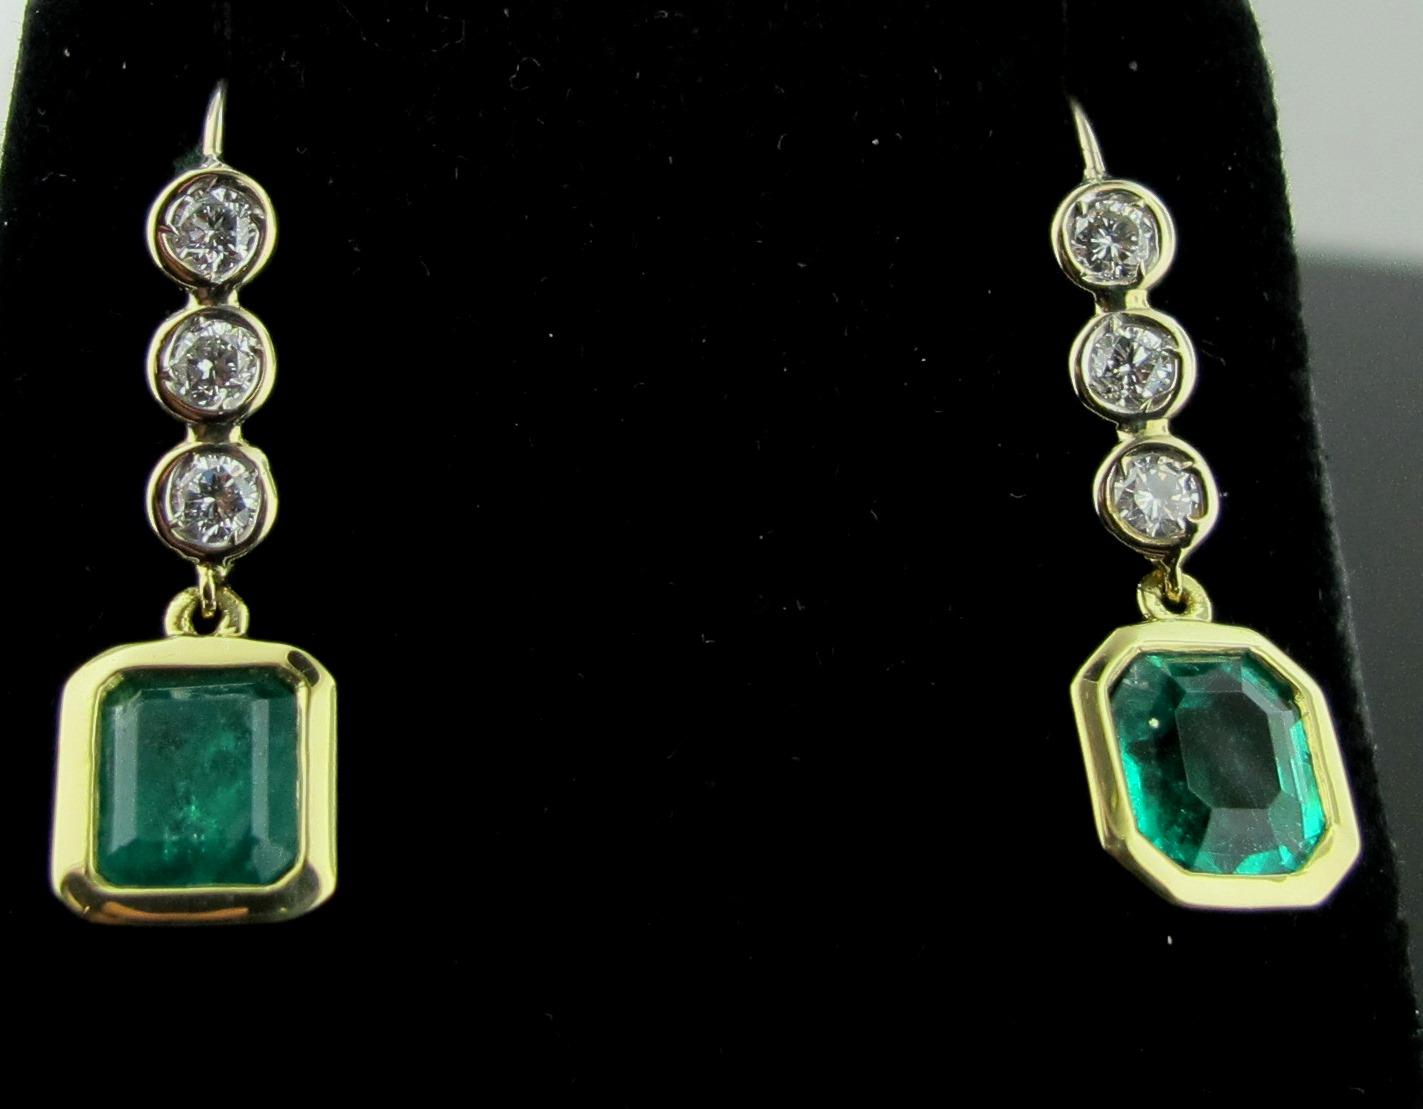 These earrings have 3 round brilliant cut diamonds on the 14 karat white gold posts.  Total diamond weight is 0.42. Color is G-H, Clarity is SI-1.  At the bottom are 2 Emeralds - one is an Emerald cut and one is an Oval cut - both are surrounded in